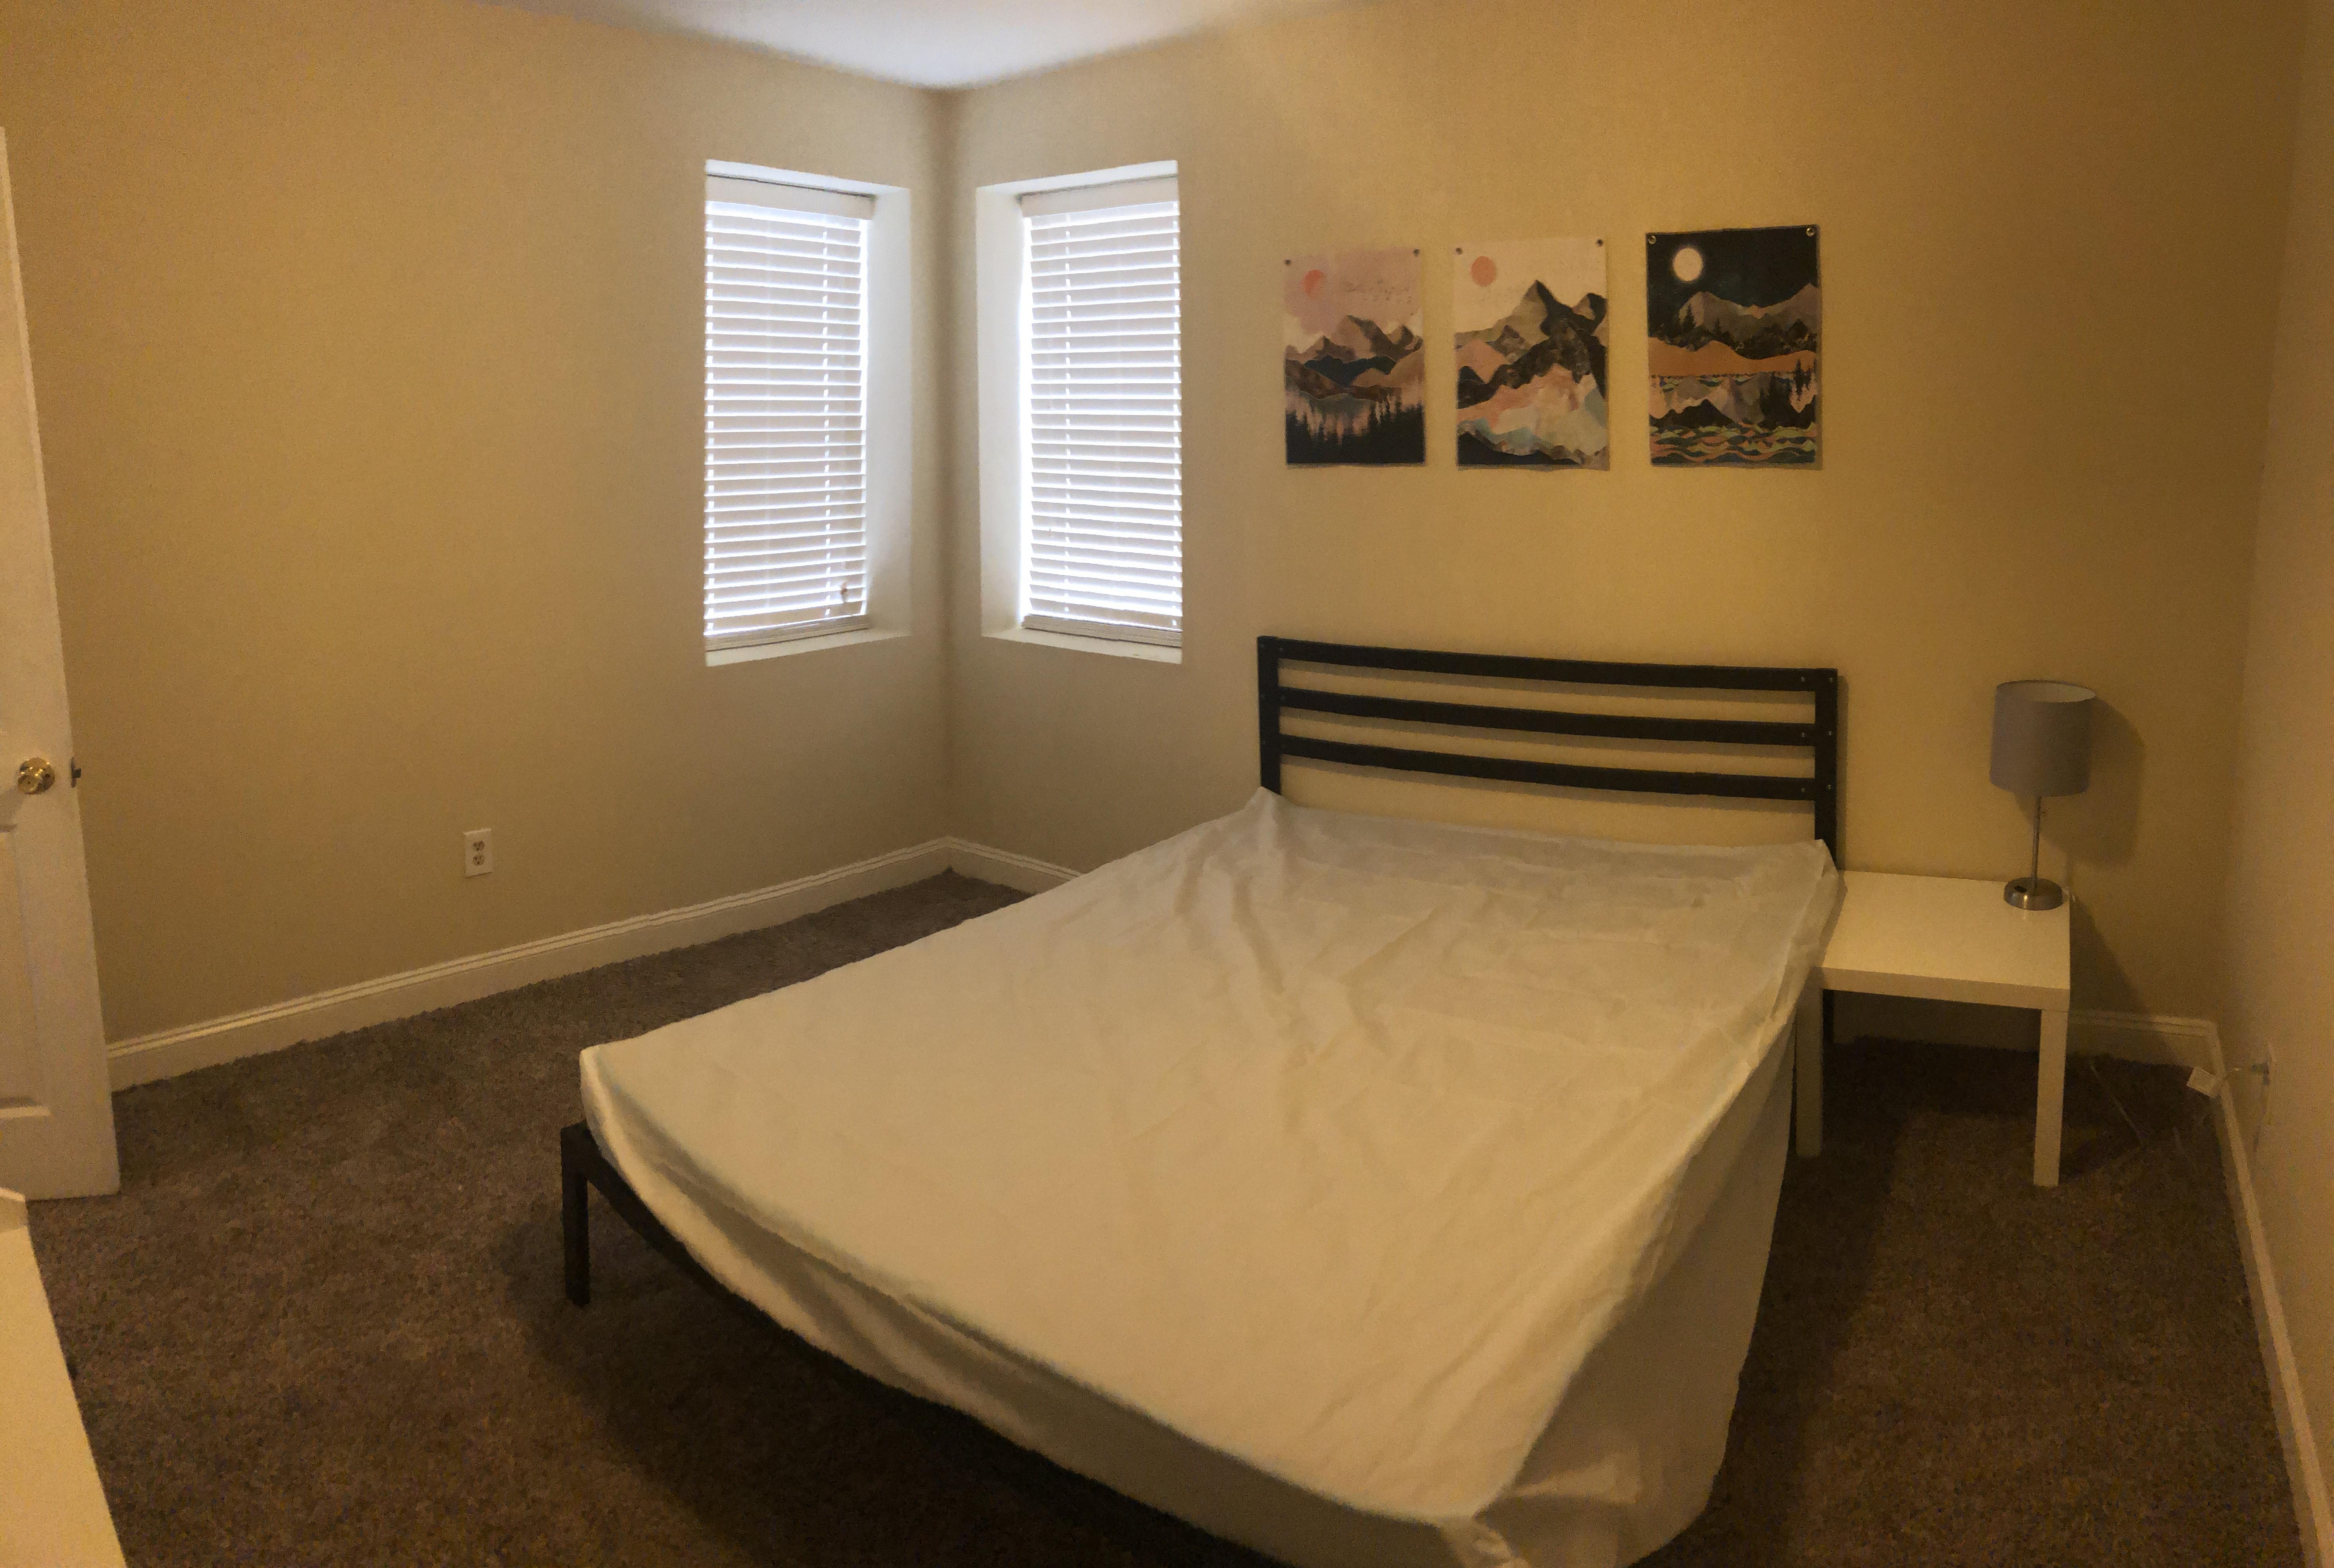 Cheap rooms for rent under $150